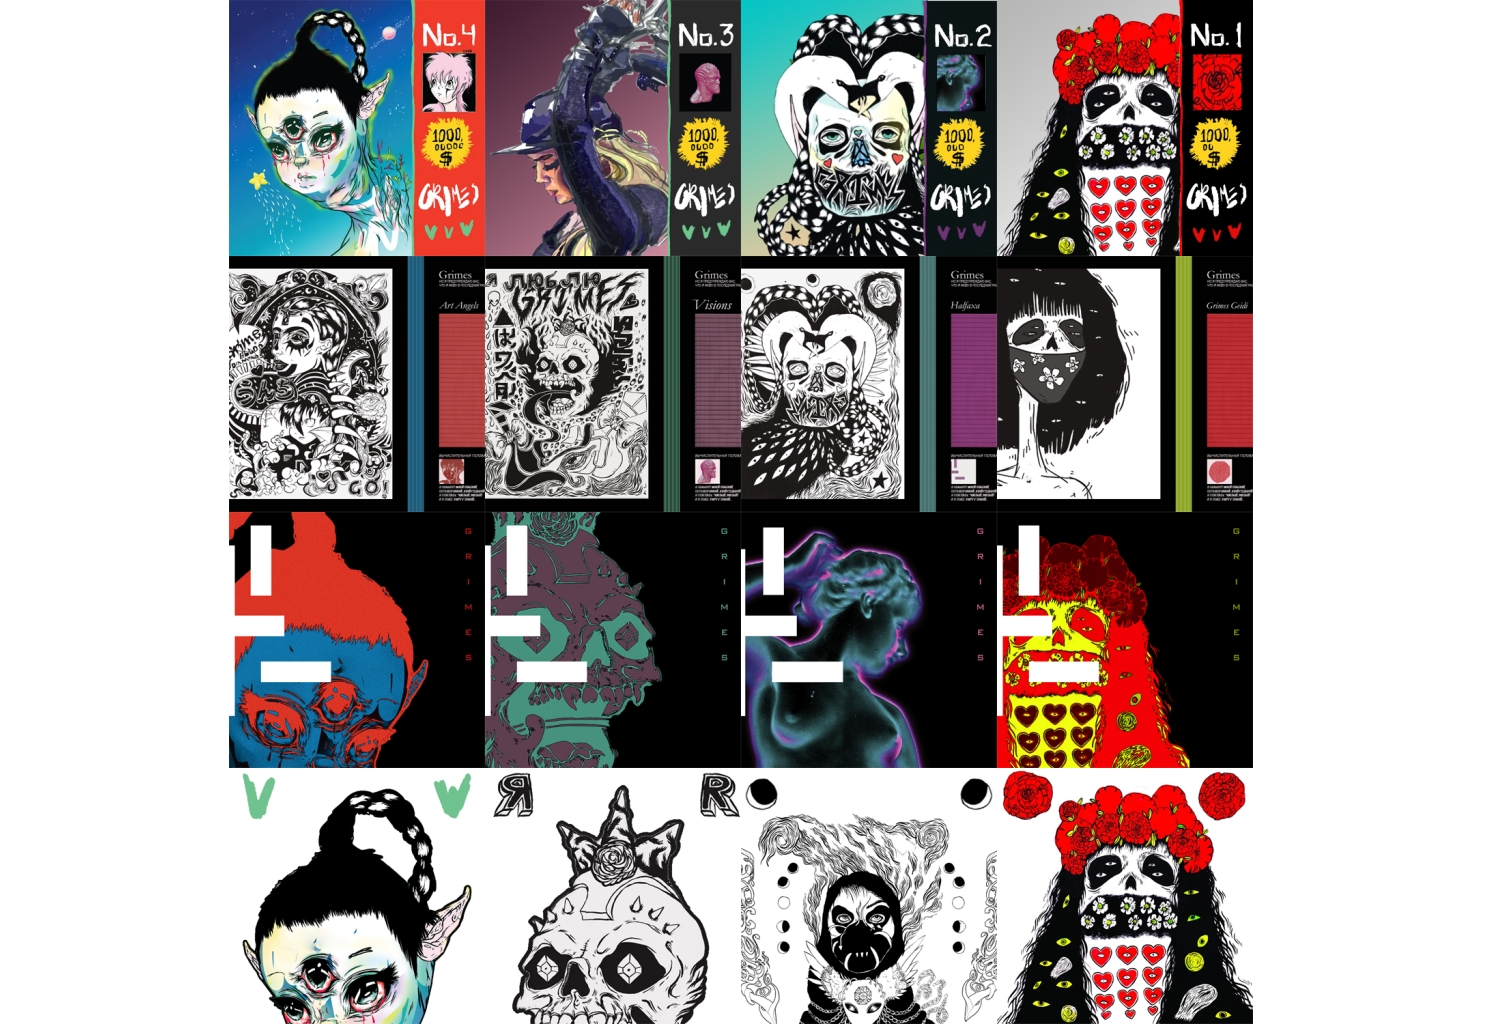 Every Grimes album in the style of every Grimes album